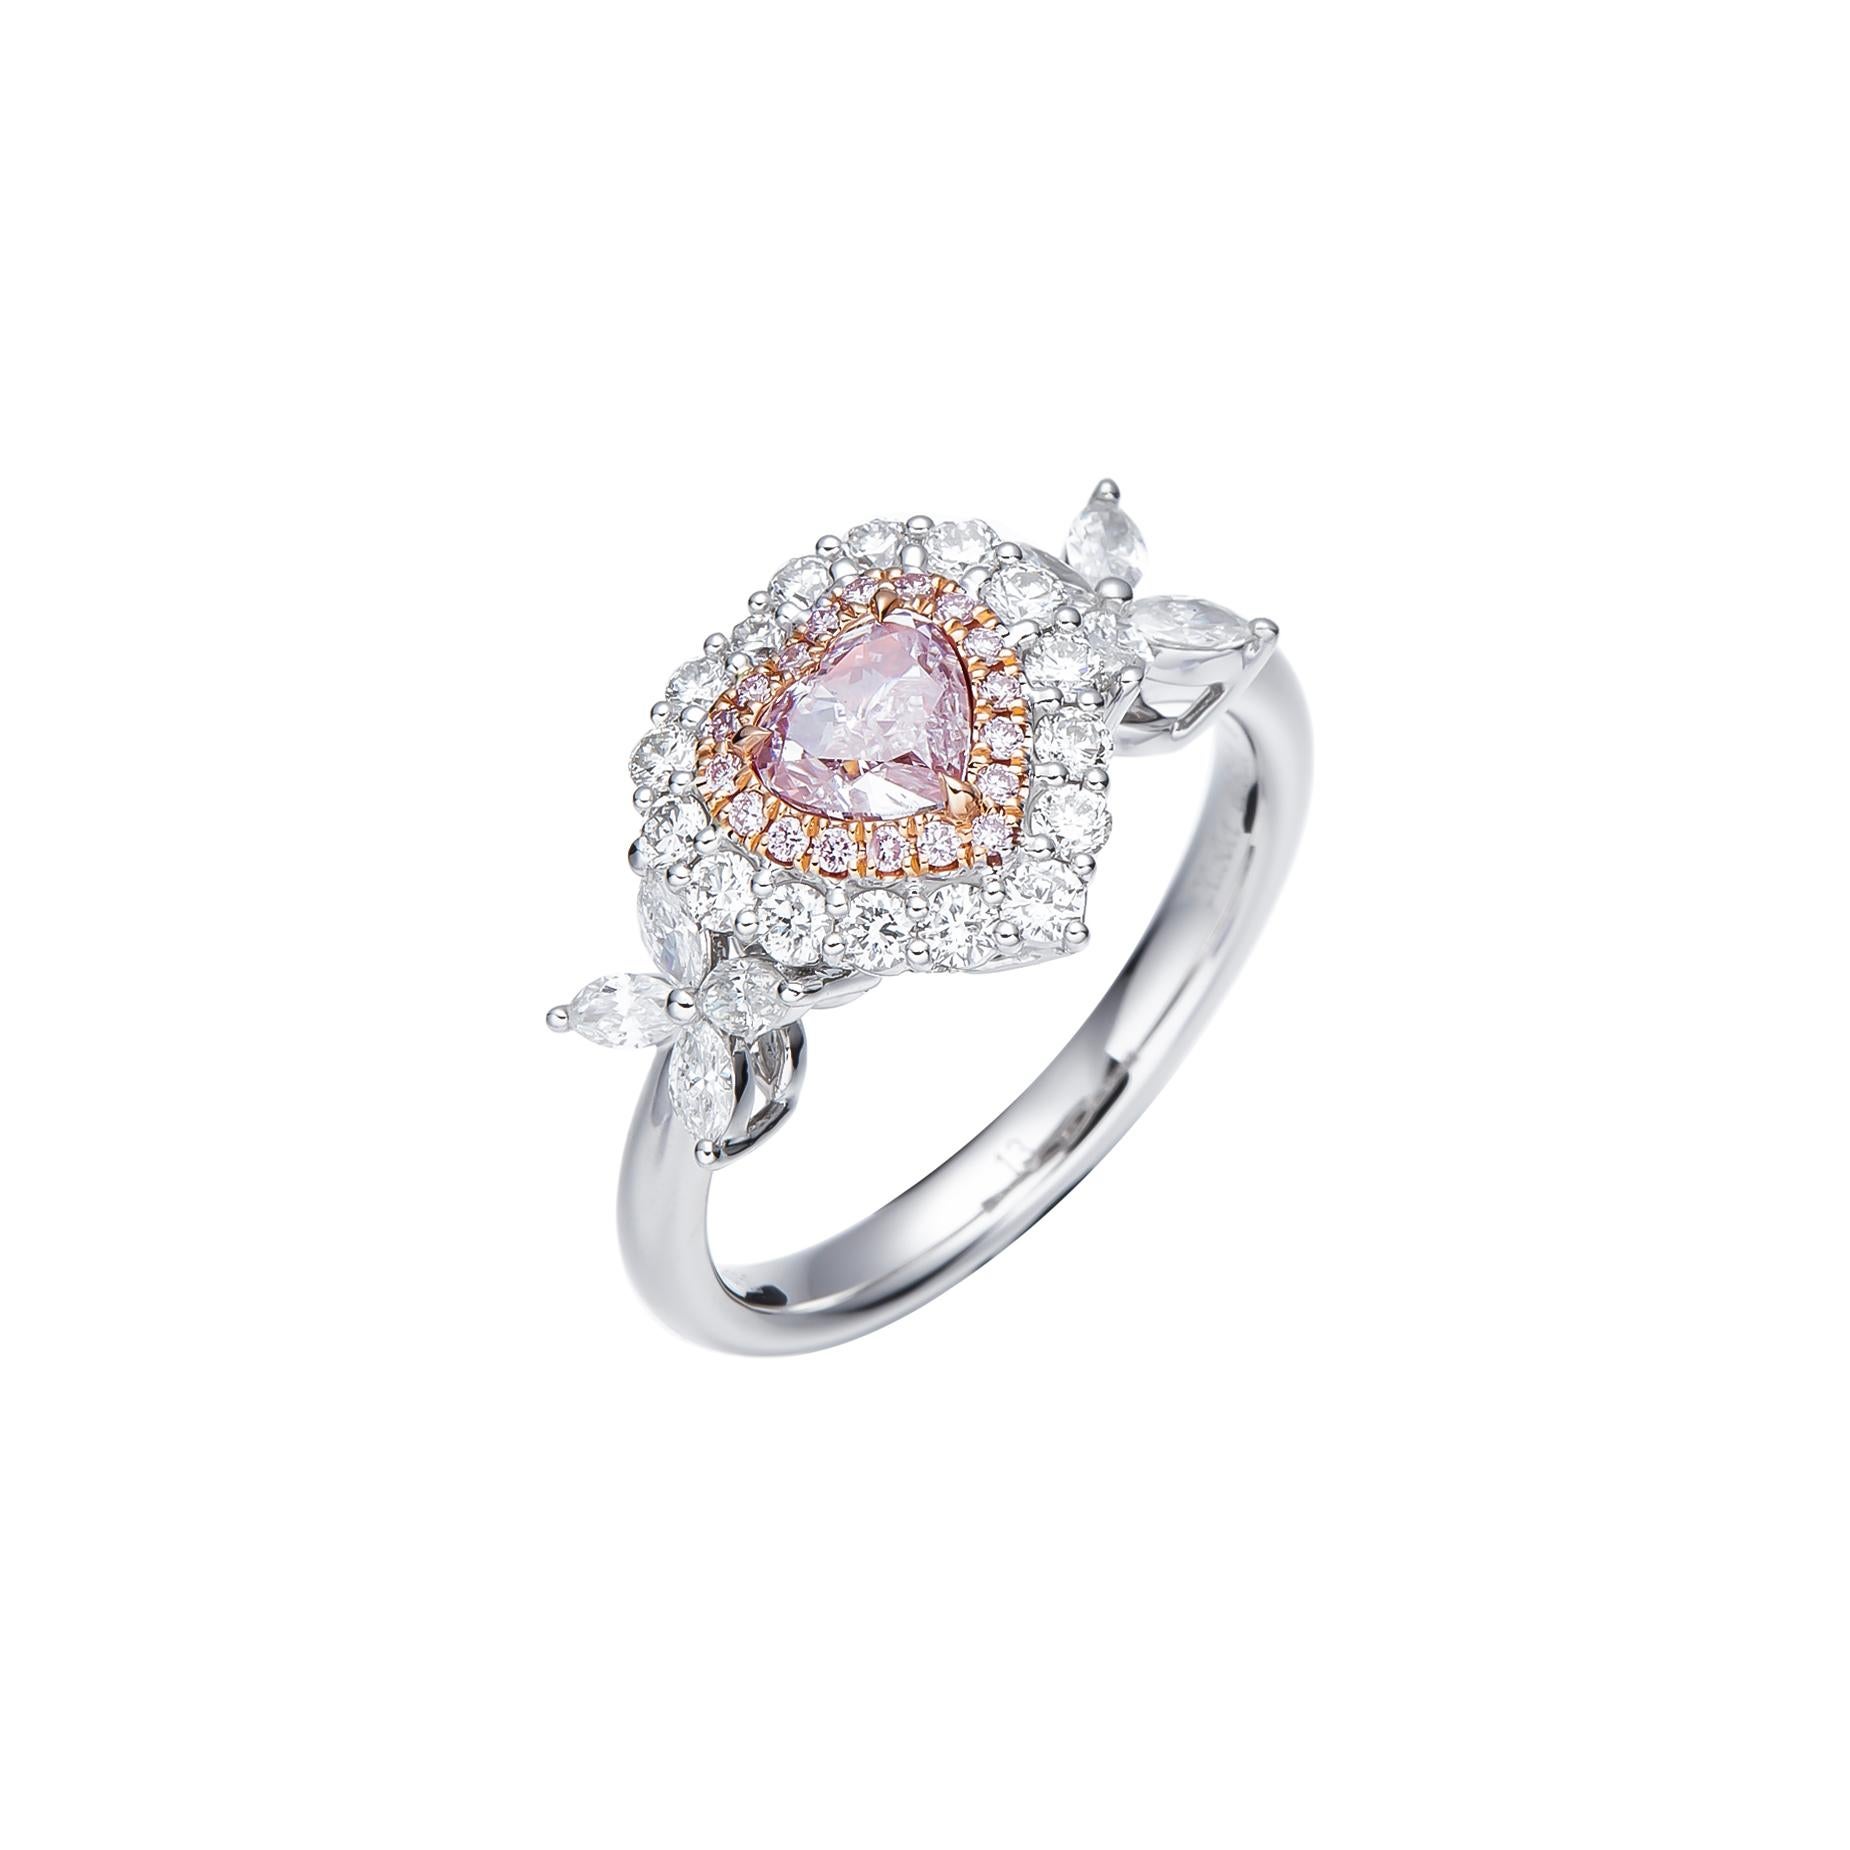 Prepare to be captivated by a dazzling display of romance and elegance – the GIA Certified 0.50 carat Natural Light Pink Heart Shape Diamond Solitaire Ring. Set upon a luminous 18kt gold band, this exquisite piece is a true masterpiece that